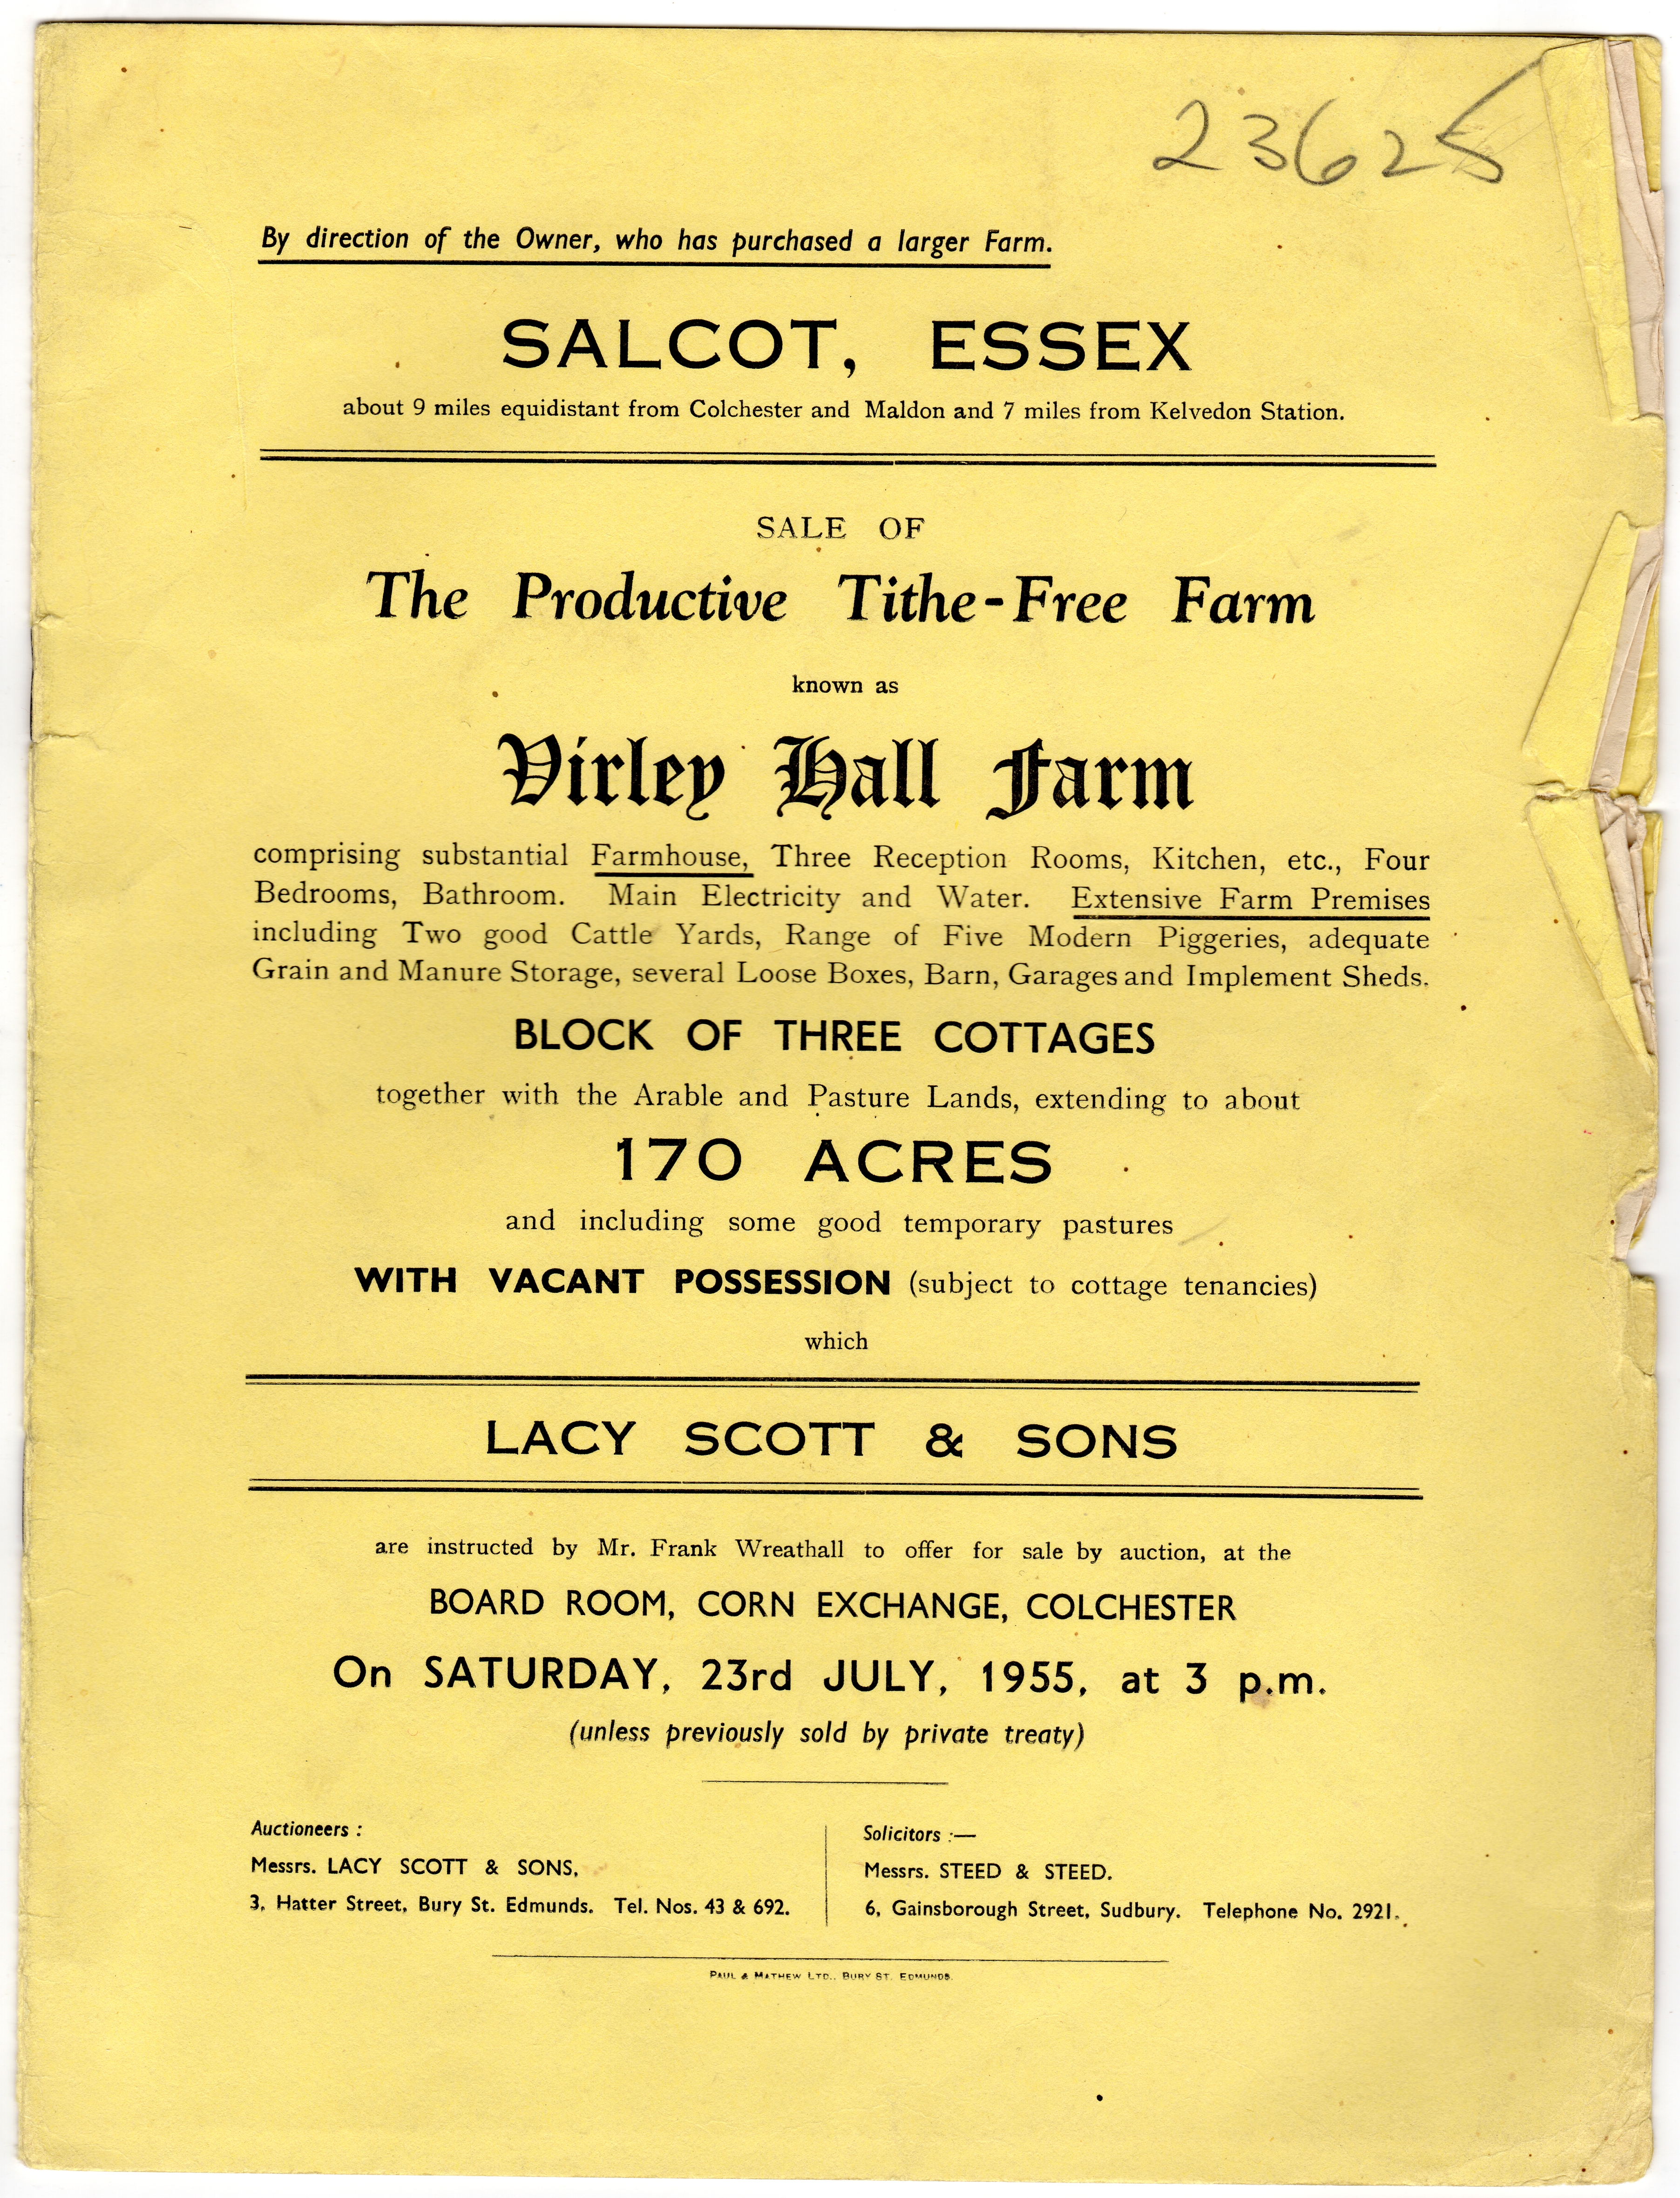  Virley Hall Farm Sale, Salcot, Essex.

170 acres

Lacy Scott & Sons are instructed to offer for sale by auction by Mr Frank Wreathall. Corn Exchange, Colchester. 
Cat1 Places-->Salcott & Virley